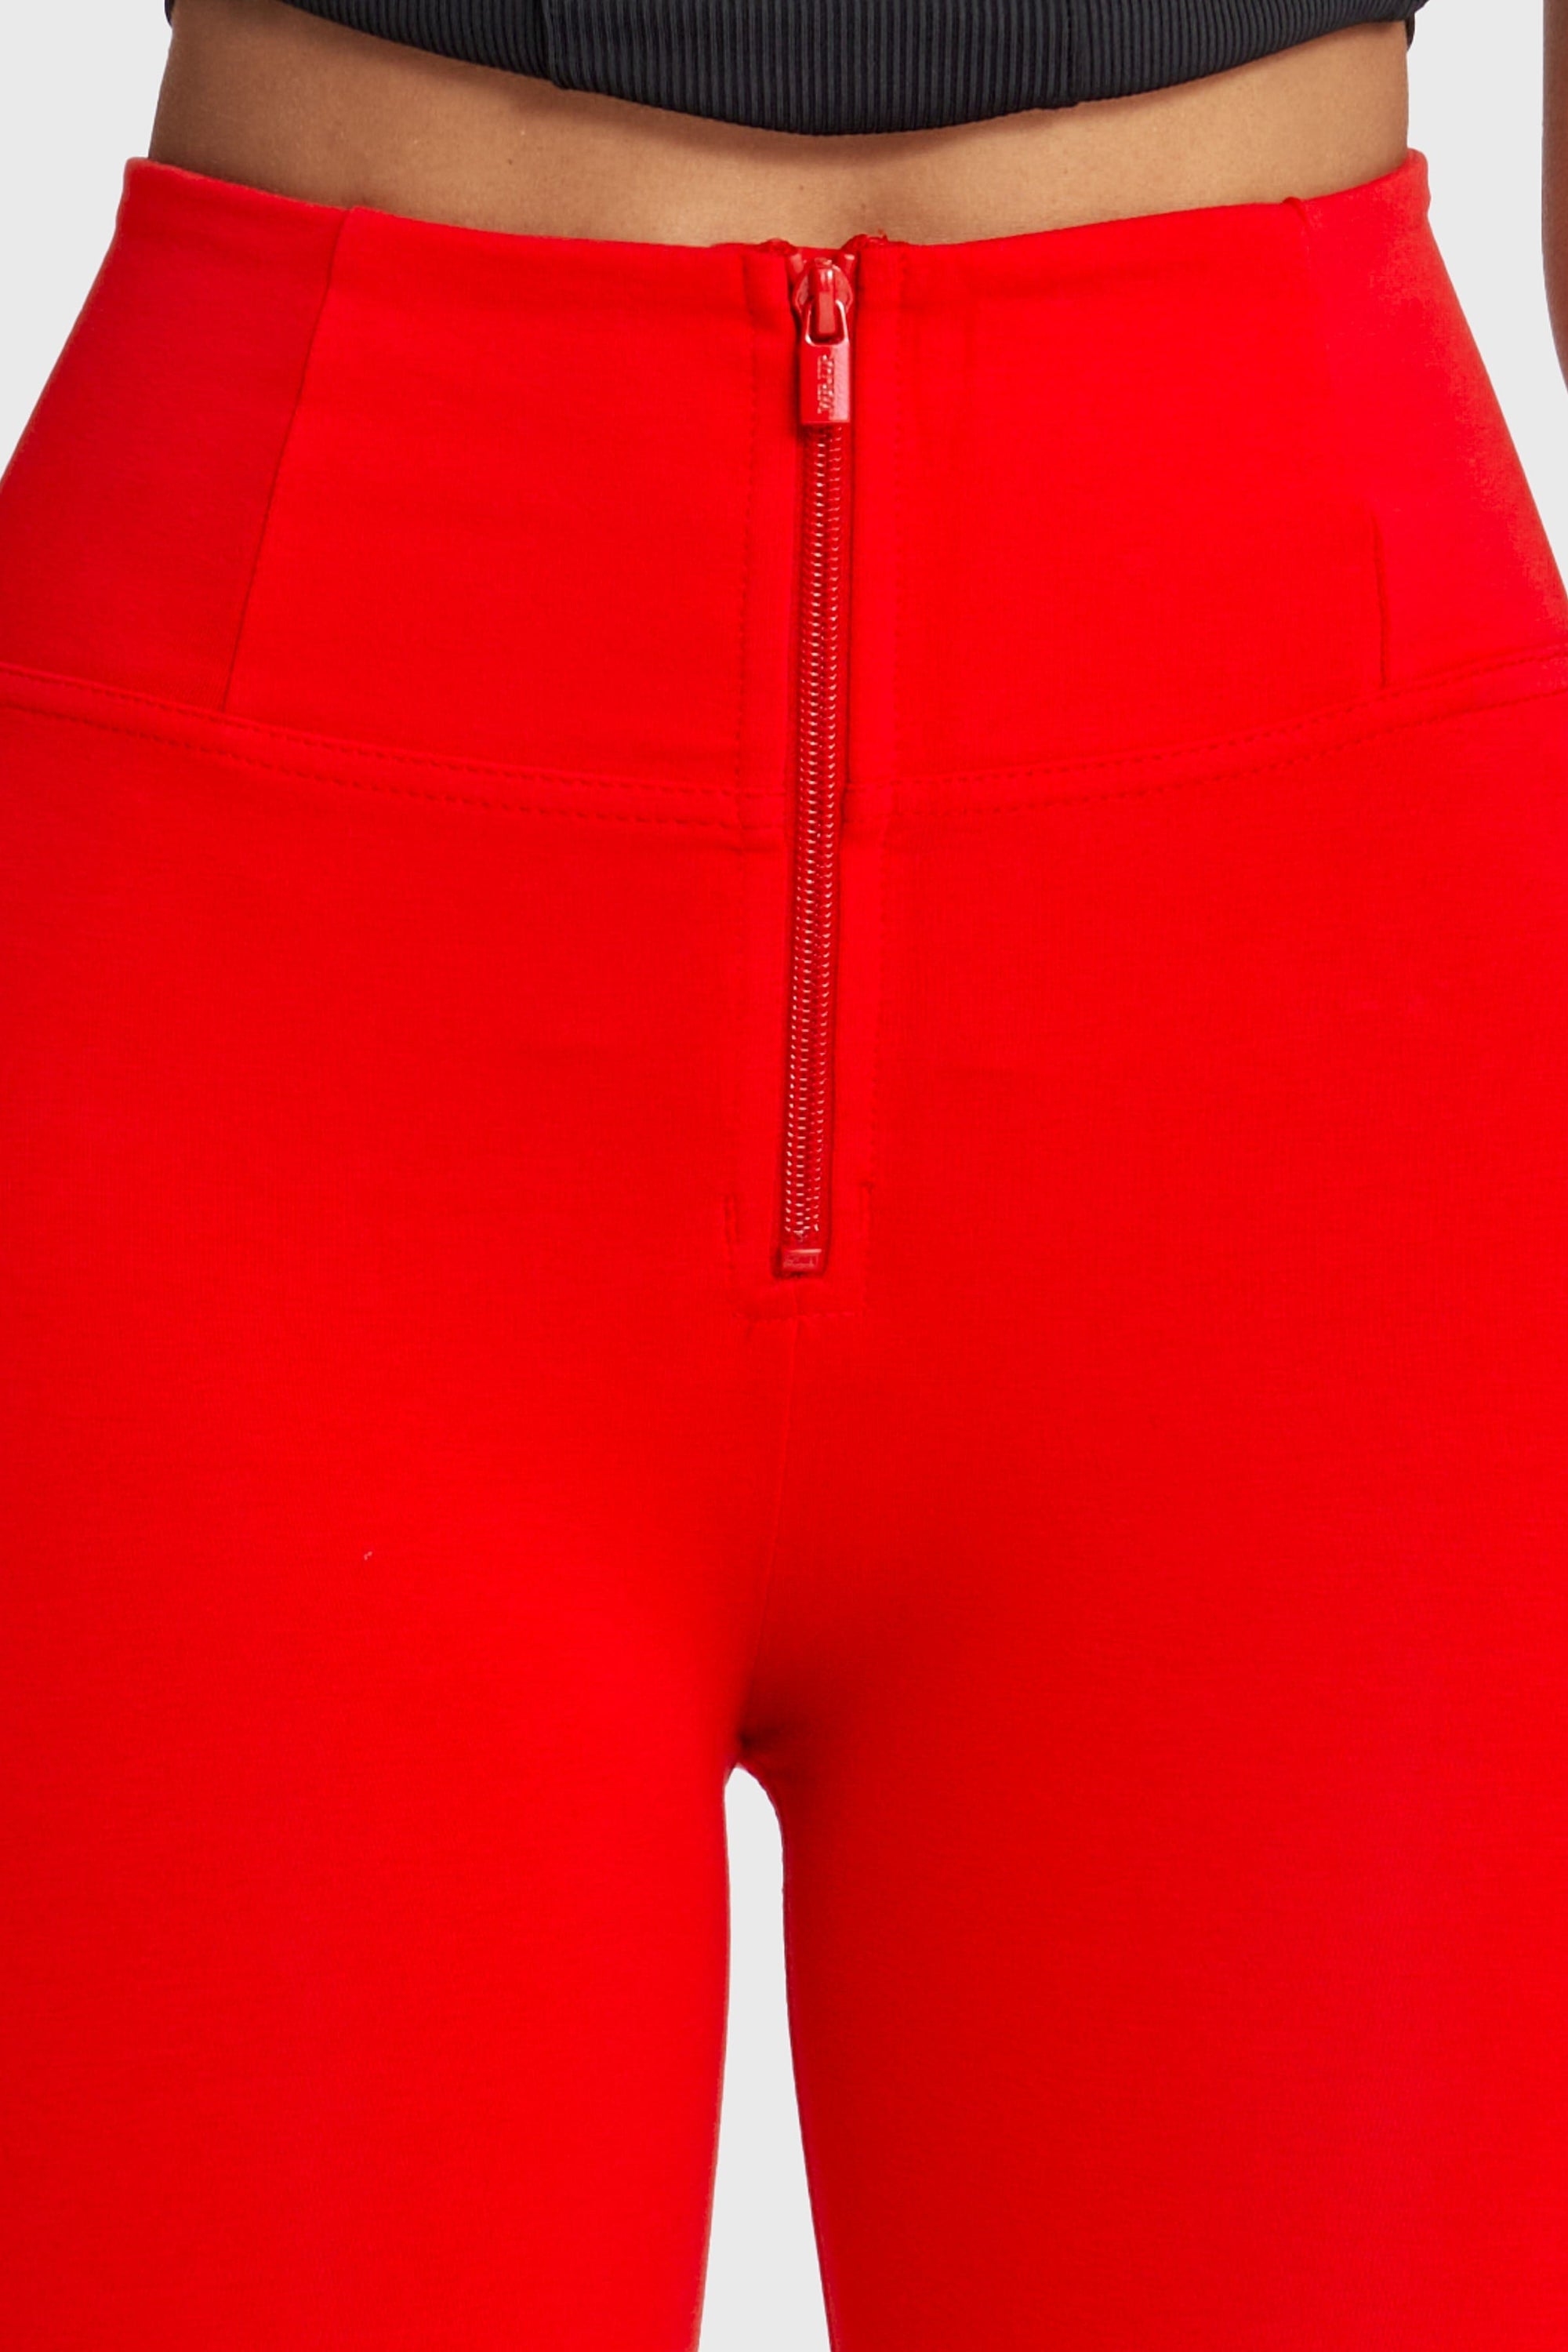 WR.UP® Fashion - High Waisted - Full Length - Red 11